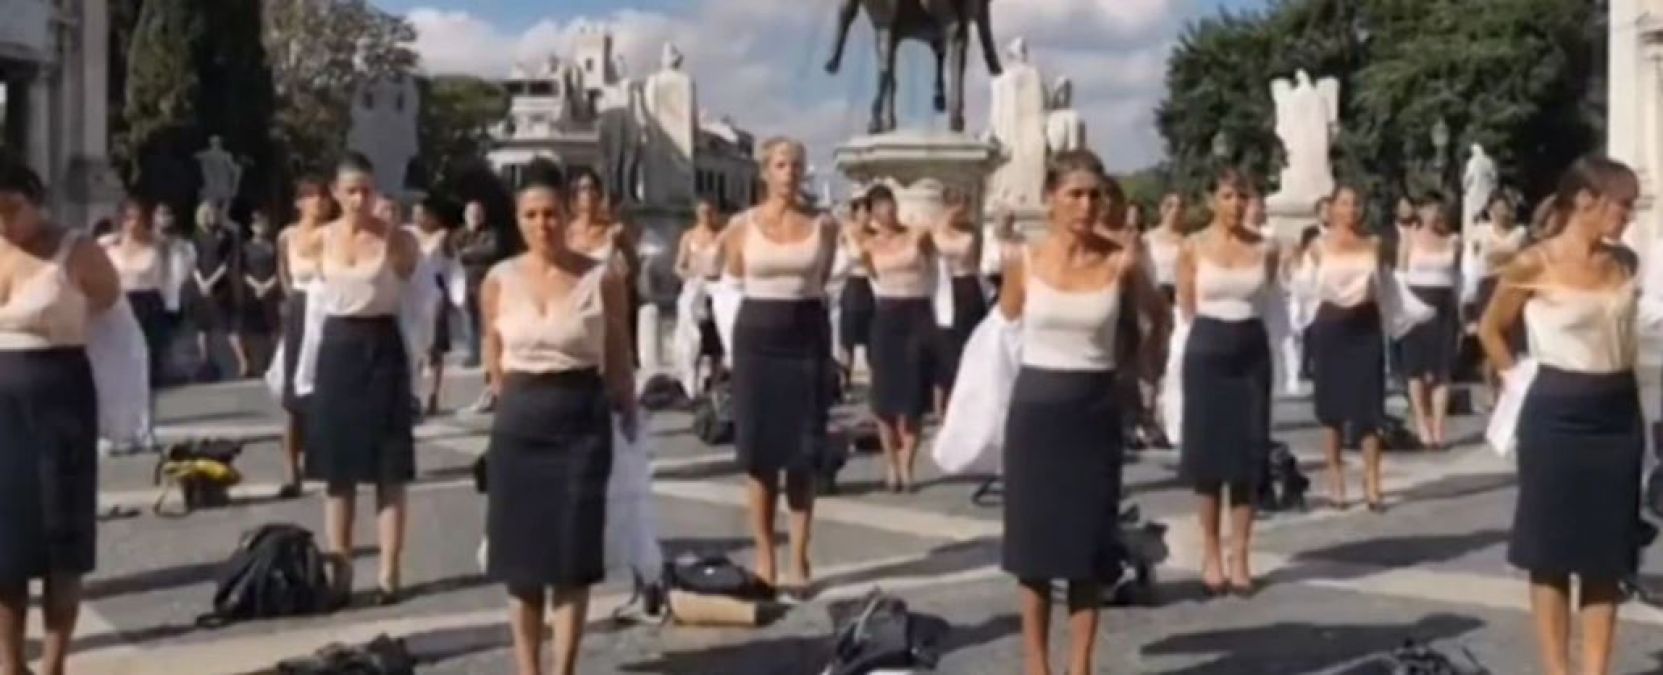 50 air hostesses took off their clothes at intersection, reason will surprise